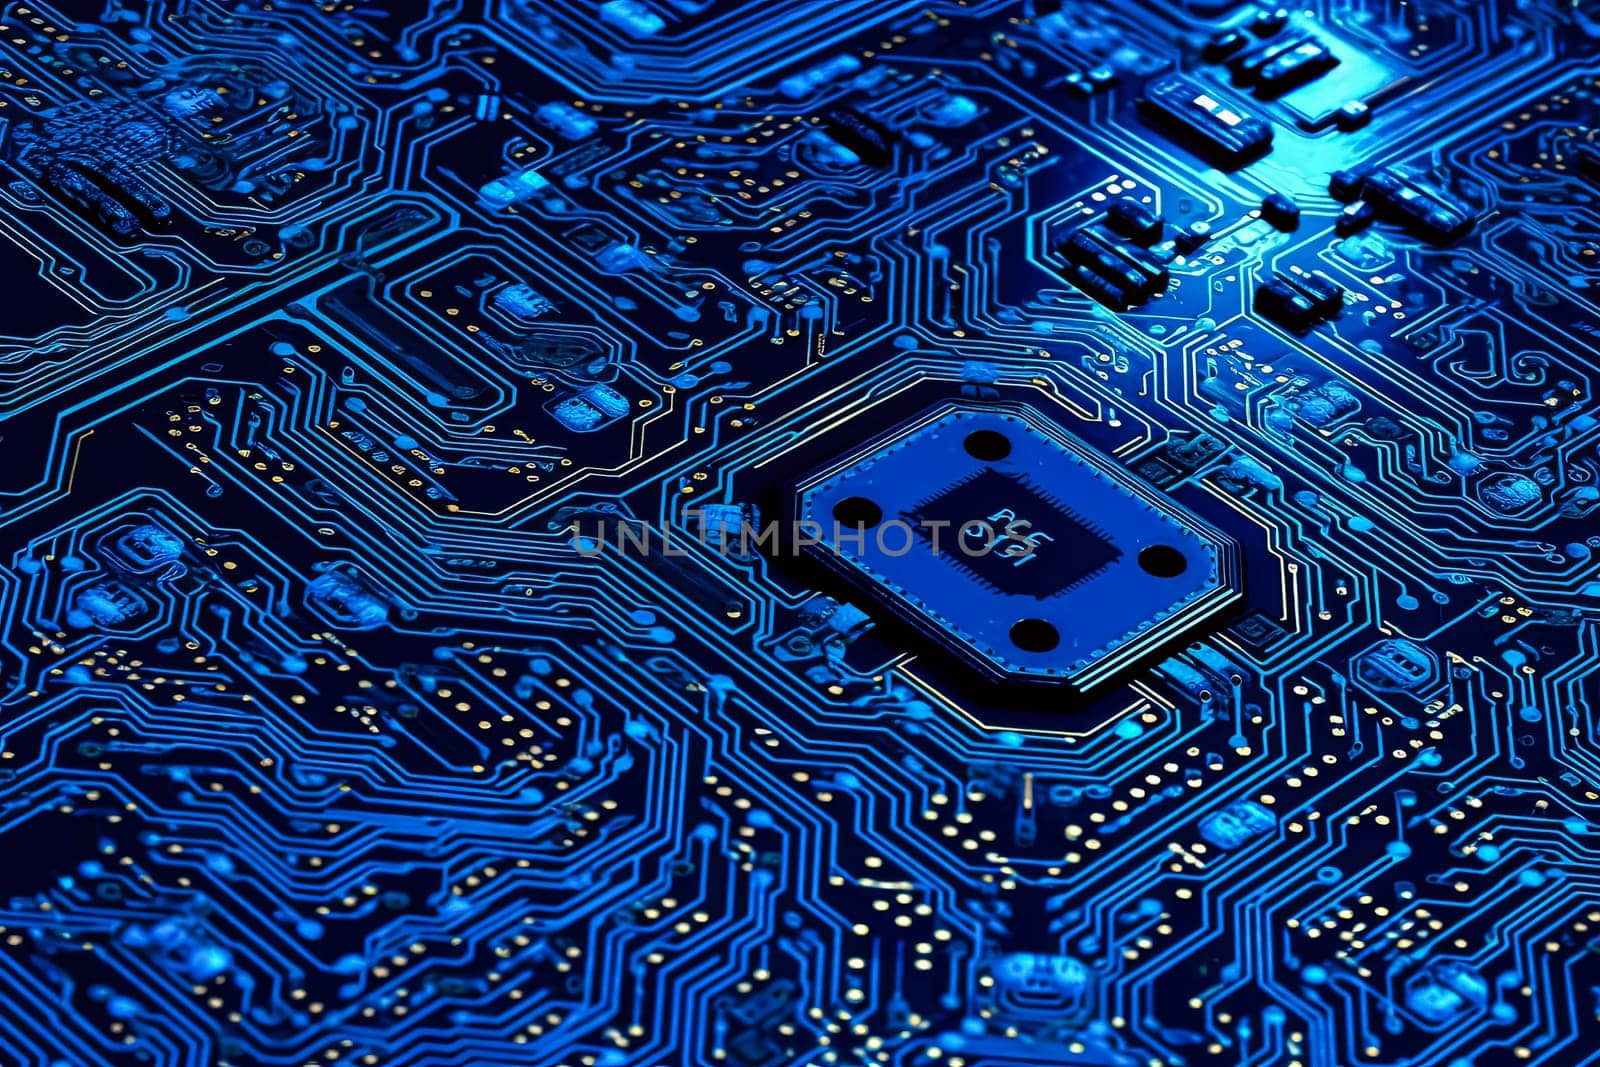 A close up of a blue electronic circuit board with a small chip on it. The chip is labeled with the letters "SPS"